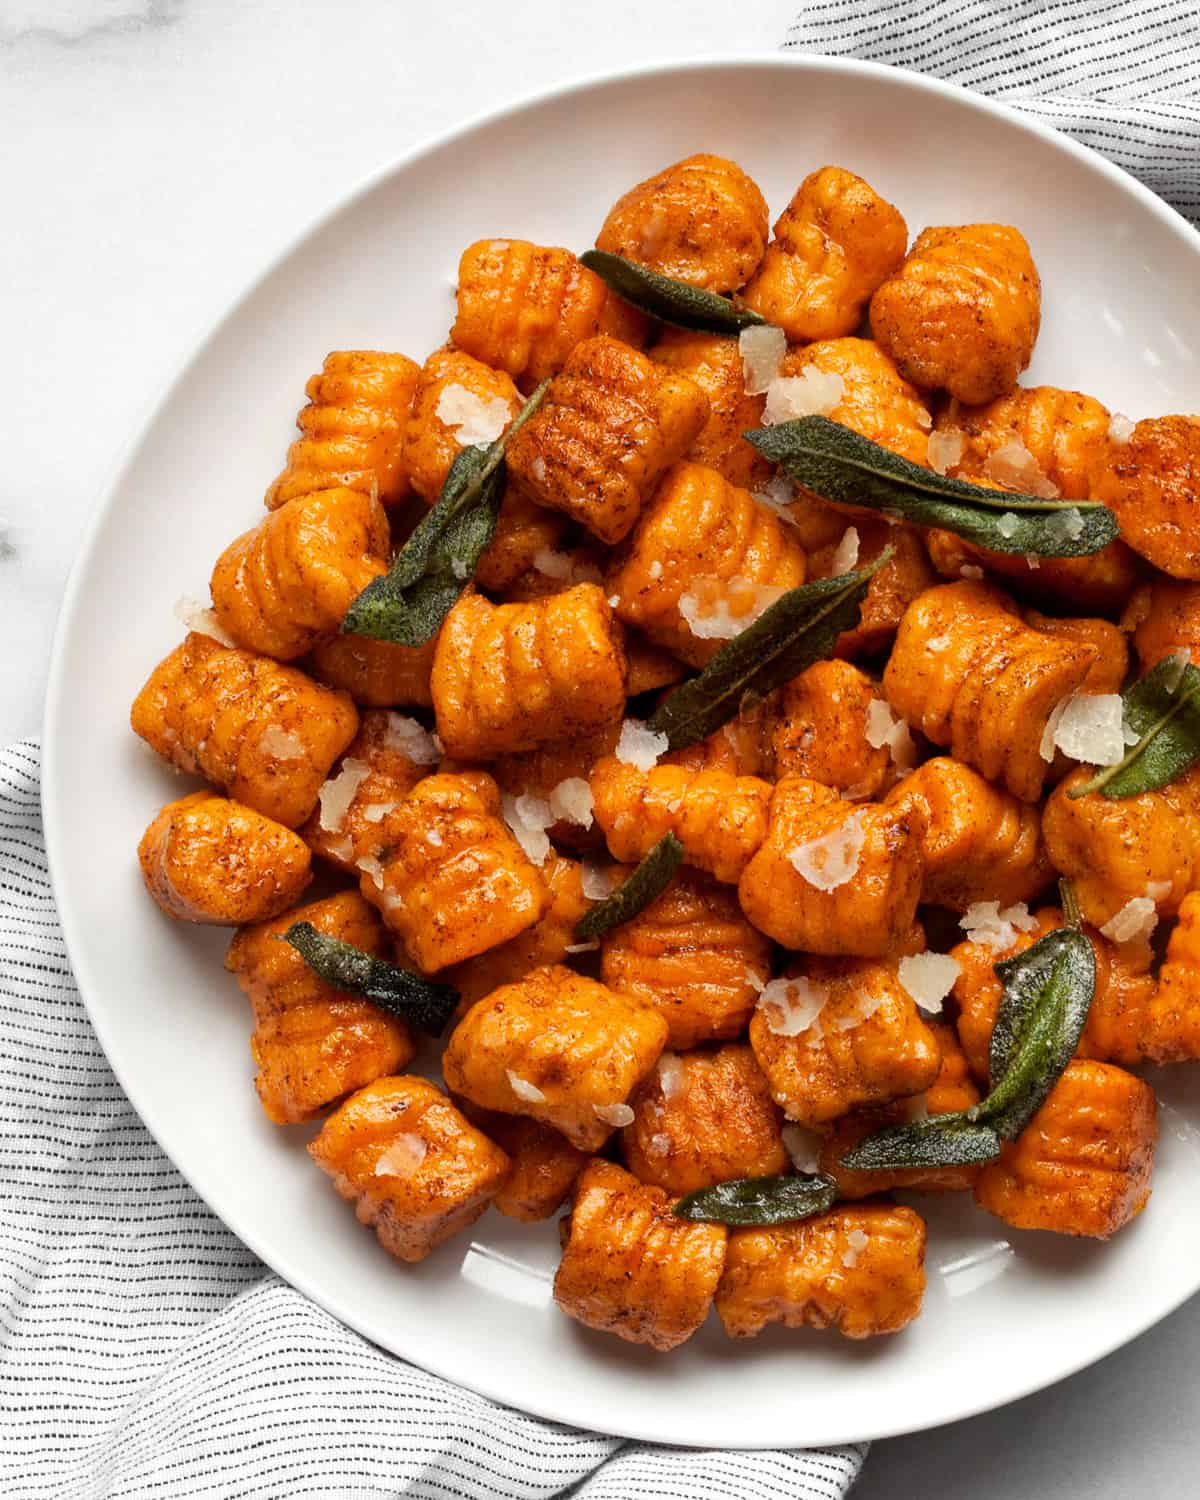 Gnocchi with sage on a plate.